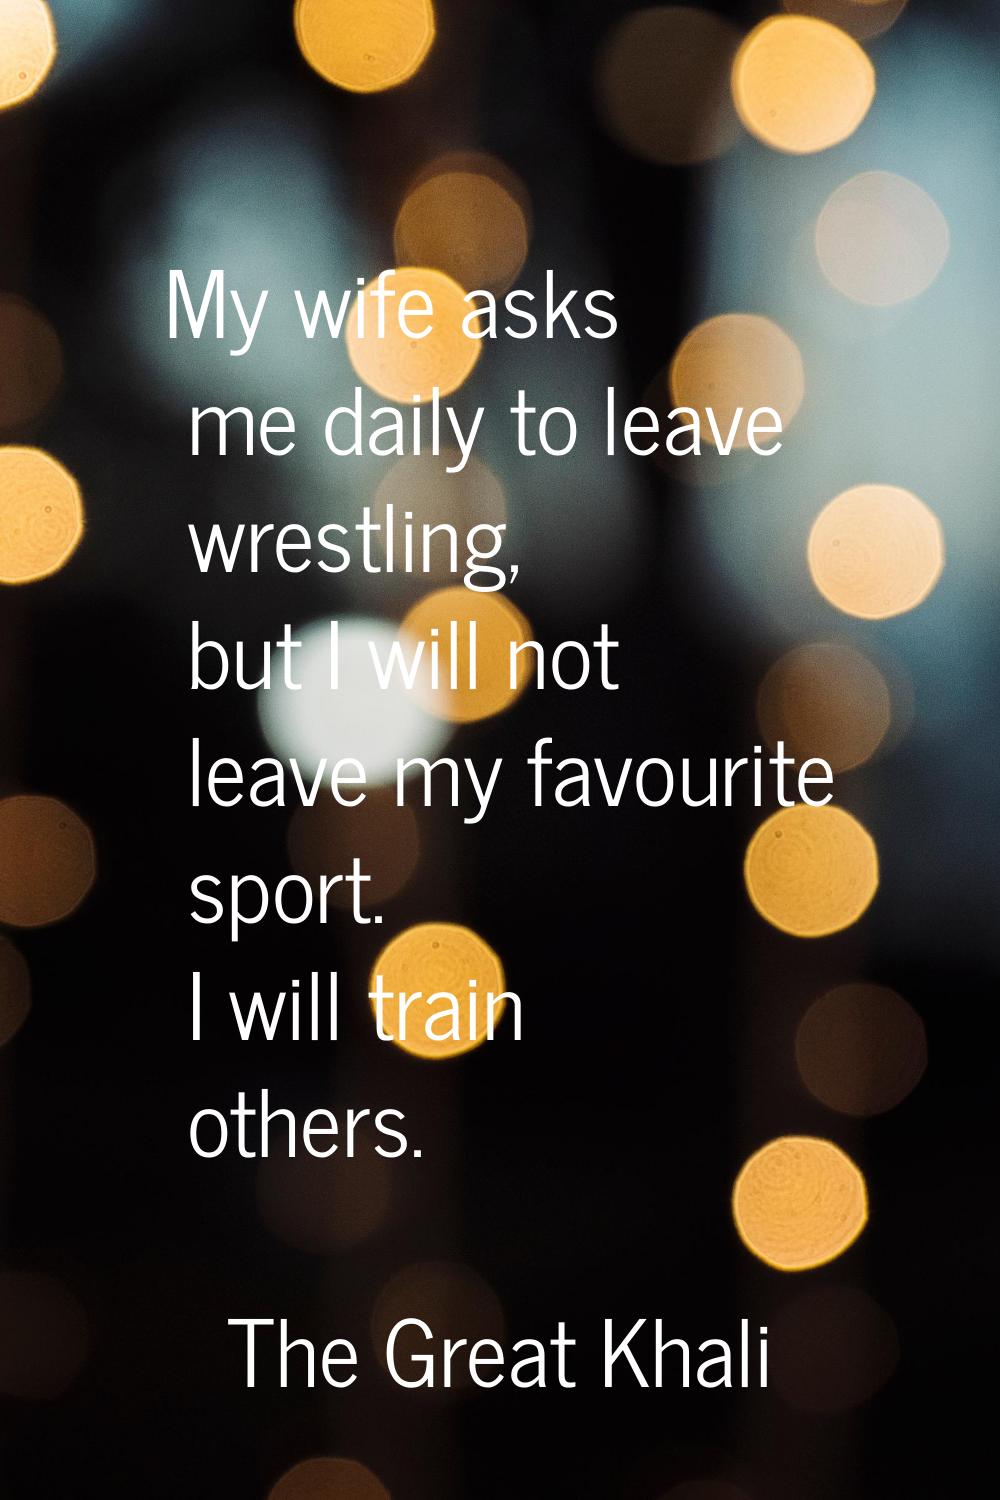 My wife asks me daily to leave wrestling, but I will not leave my favourite sport. I will train oth